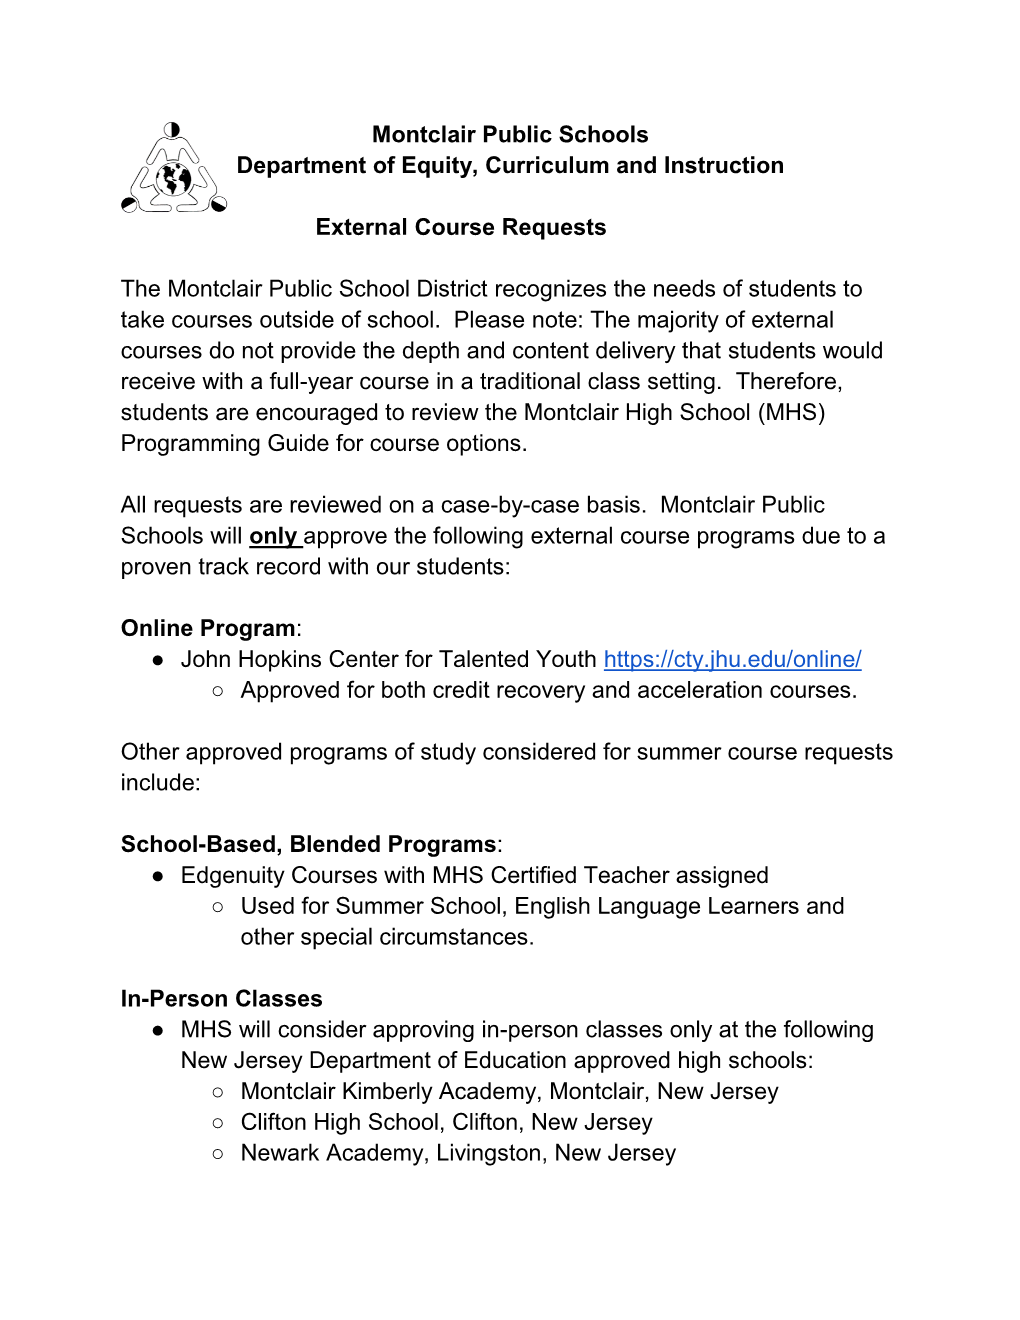 Montclair High School (MHS) Programming Guide for Course Options